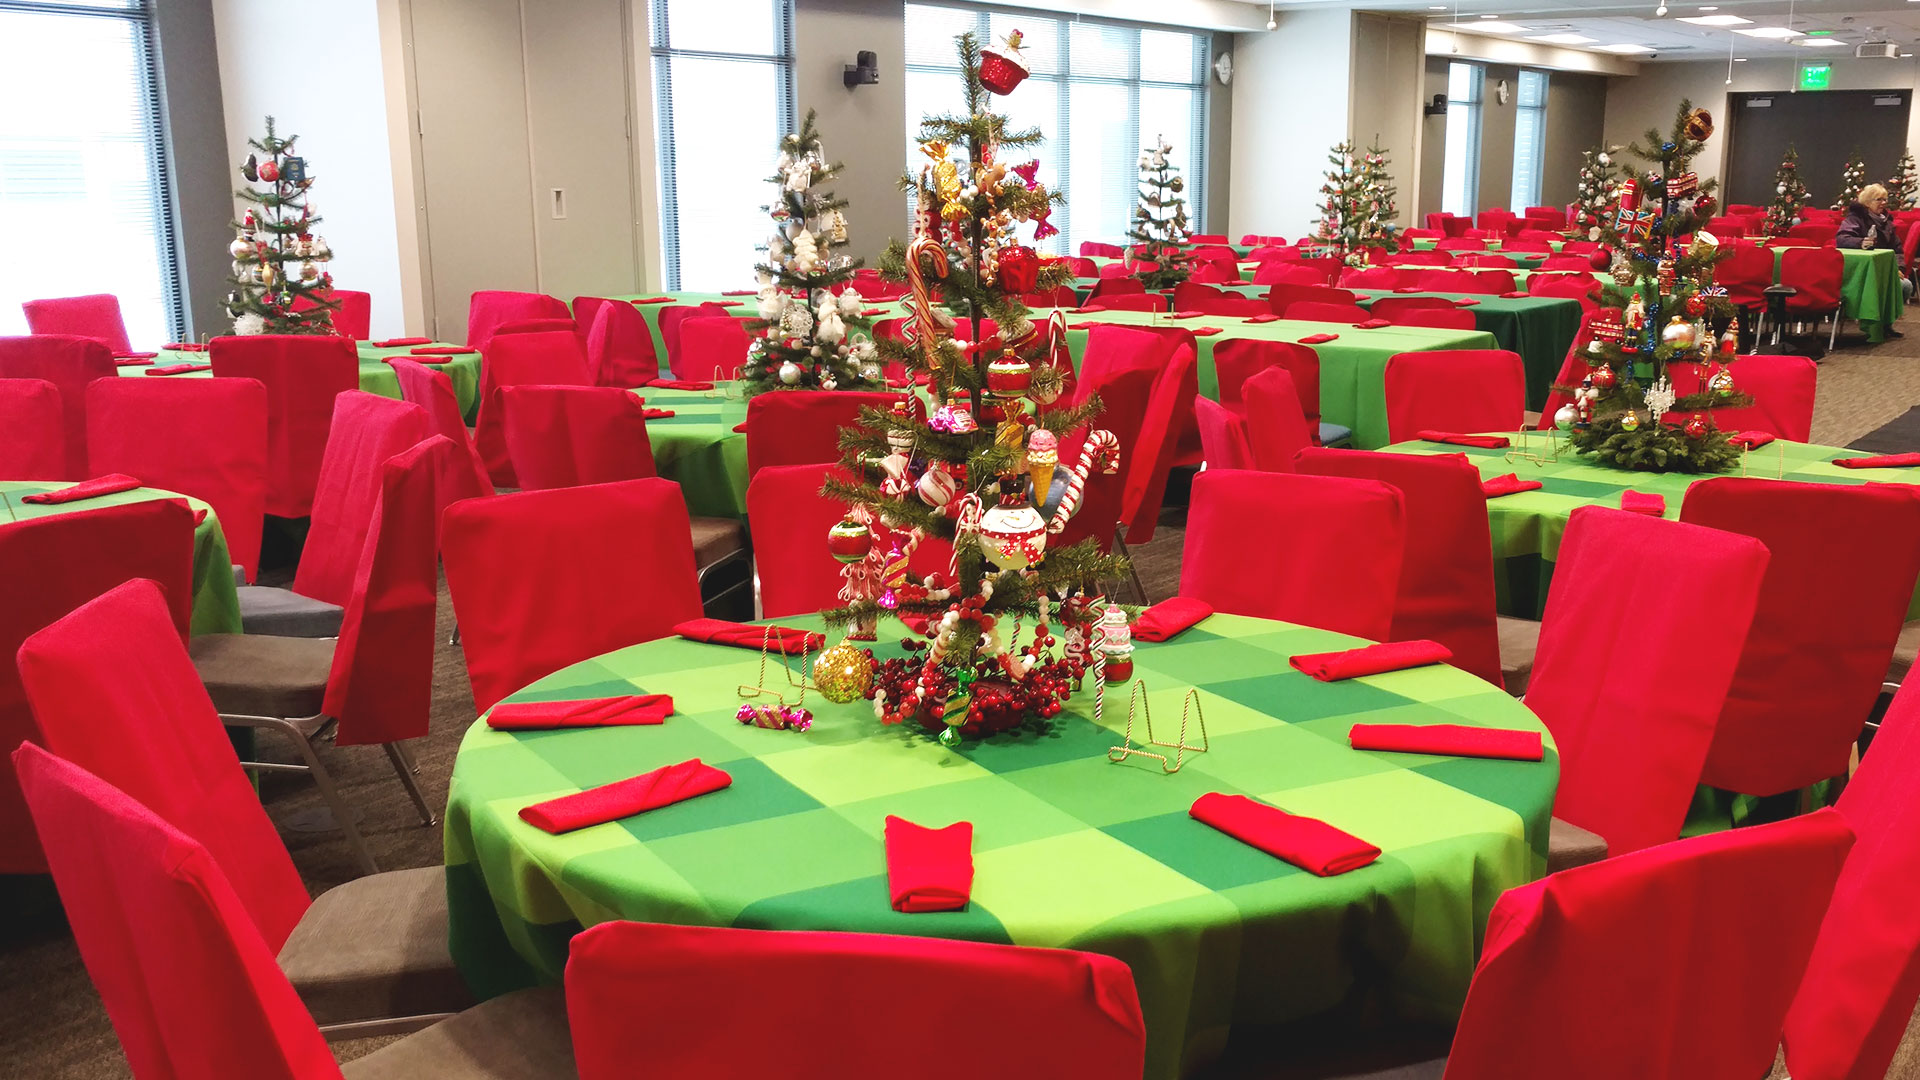 Green plaid tablecloths with red chair covers for holiday event